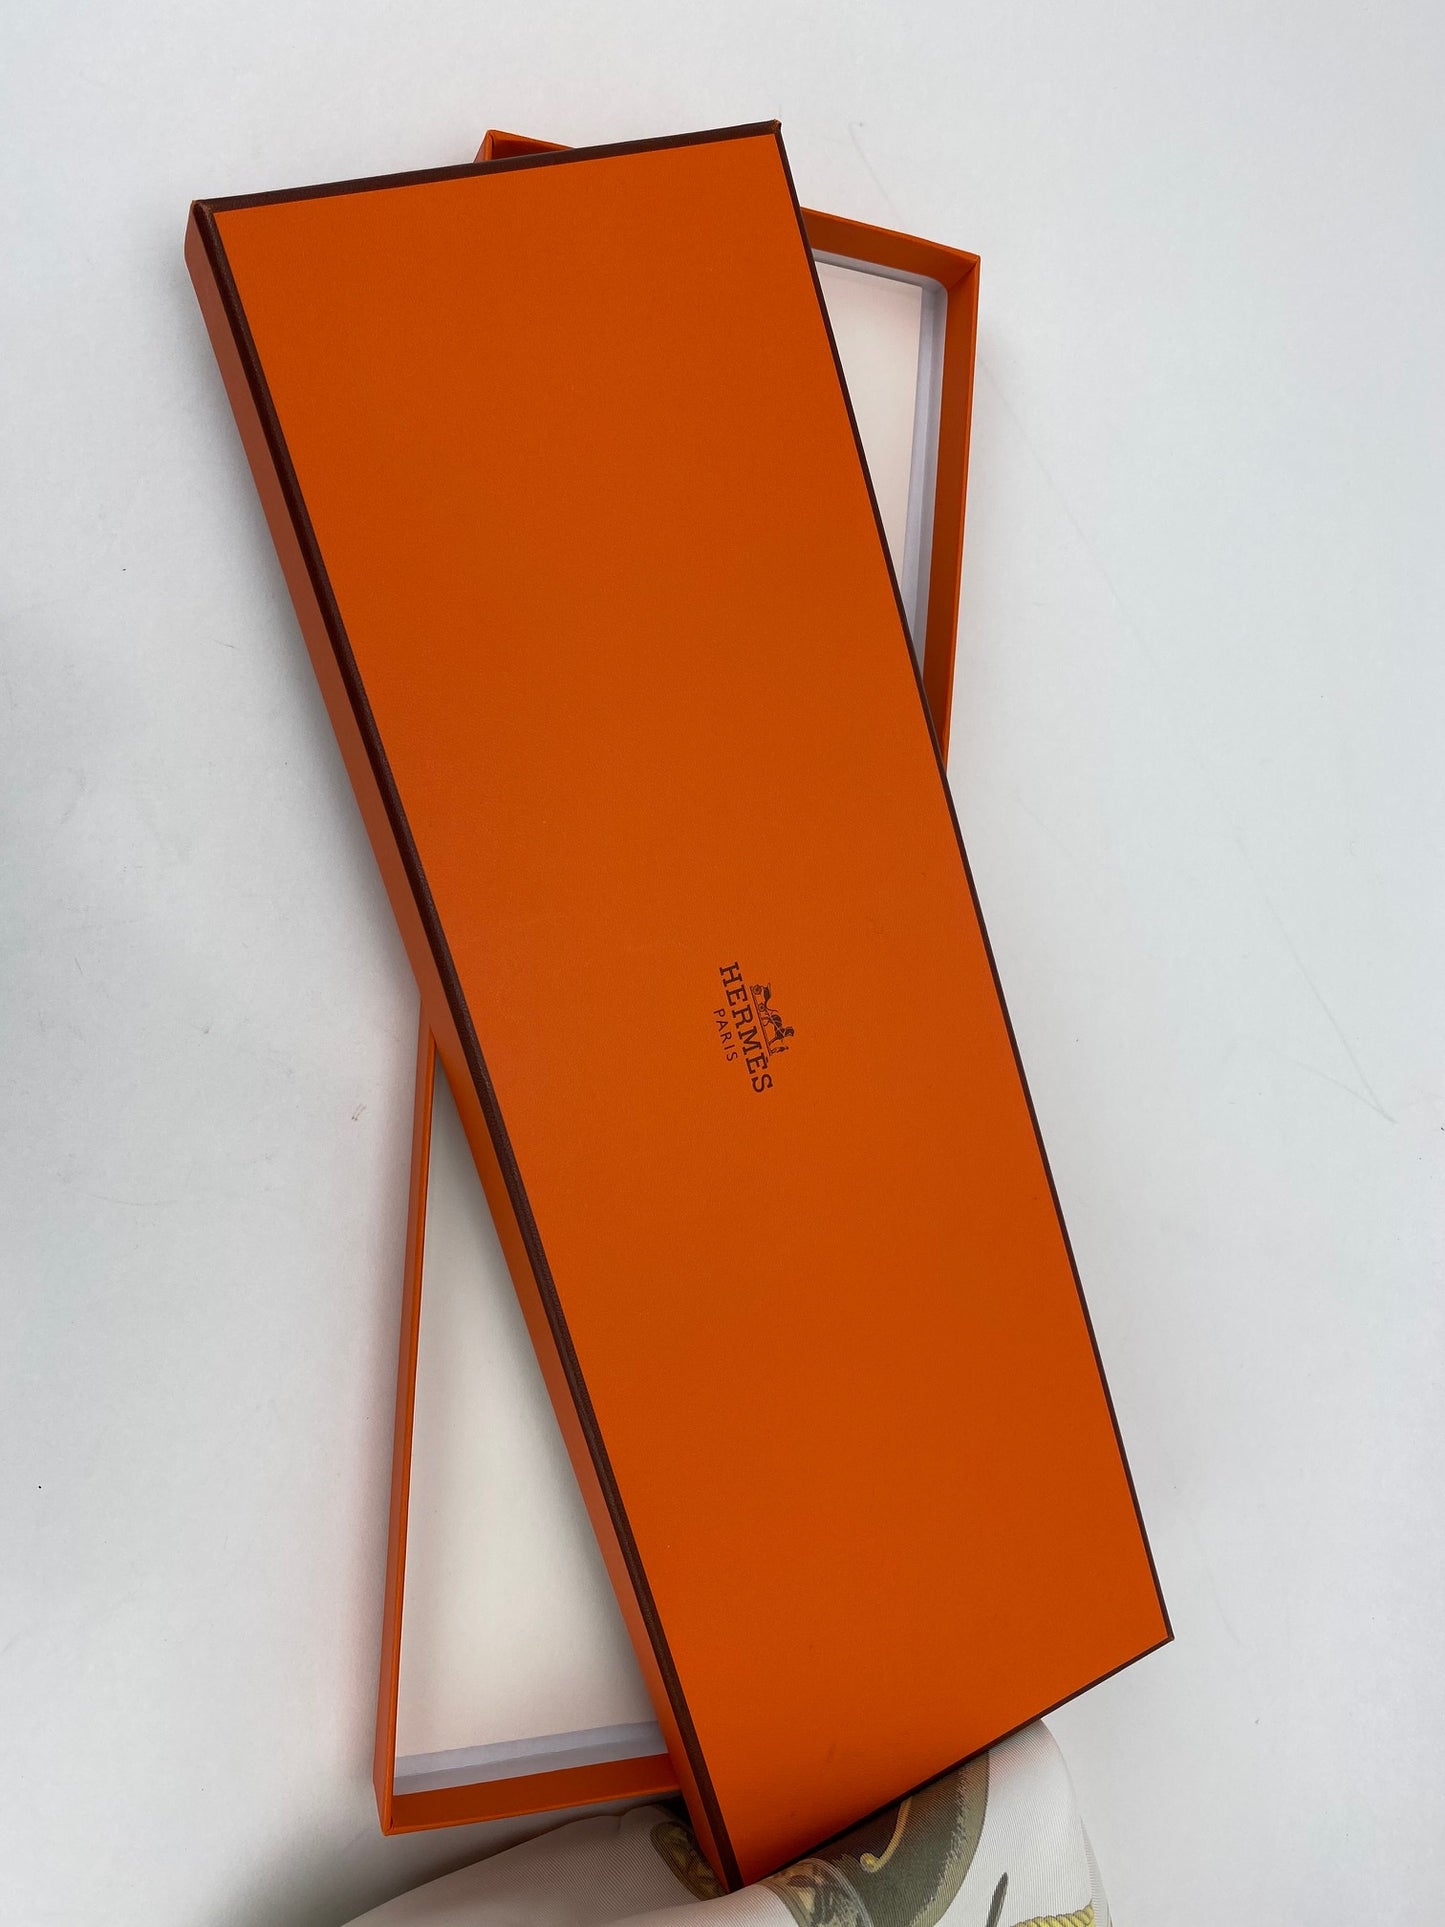 Authentic Orange Hermes Small Twilly Scarf Box